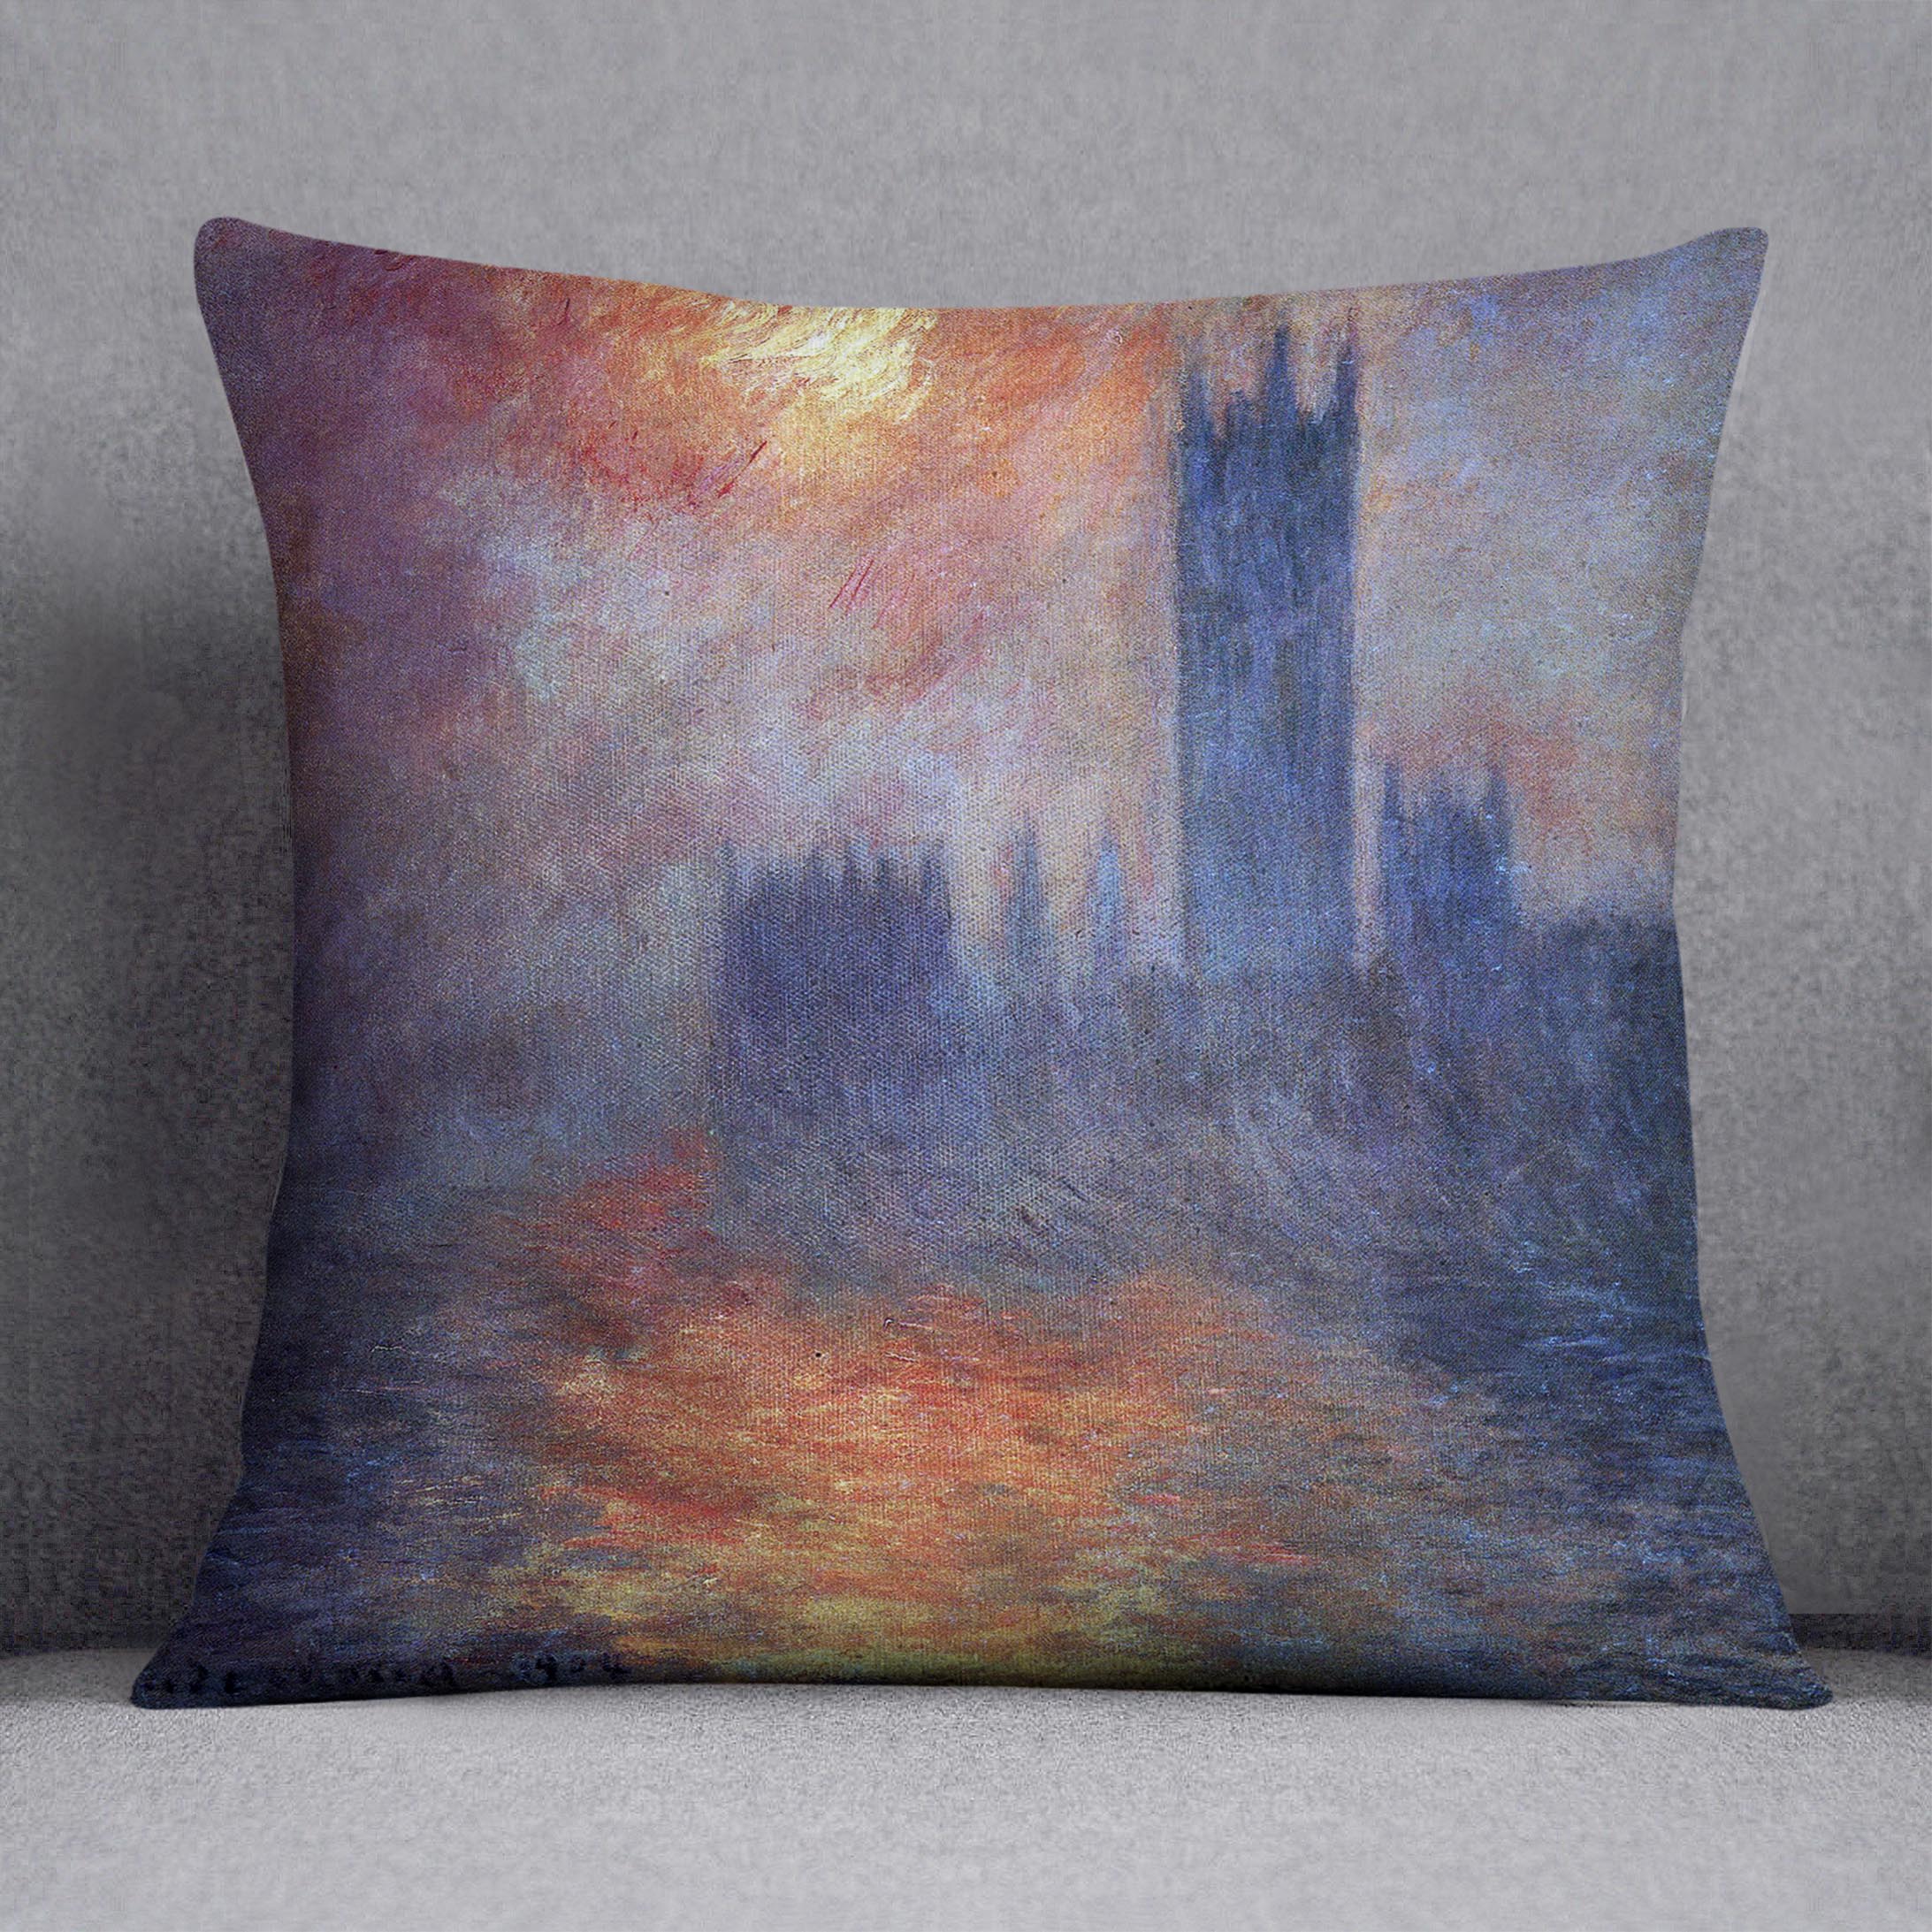 The Houses of Parliament Sunset by Monet Cushion